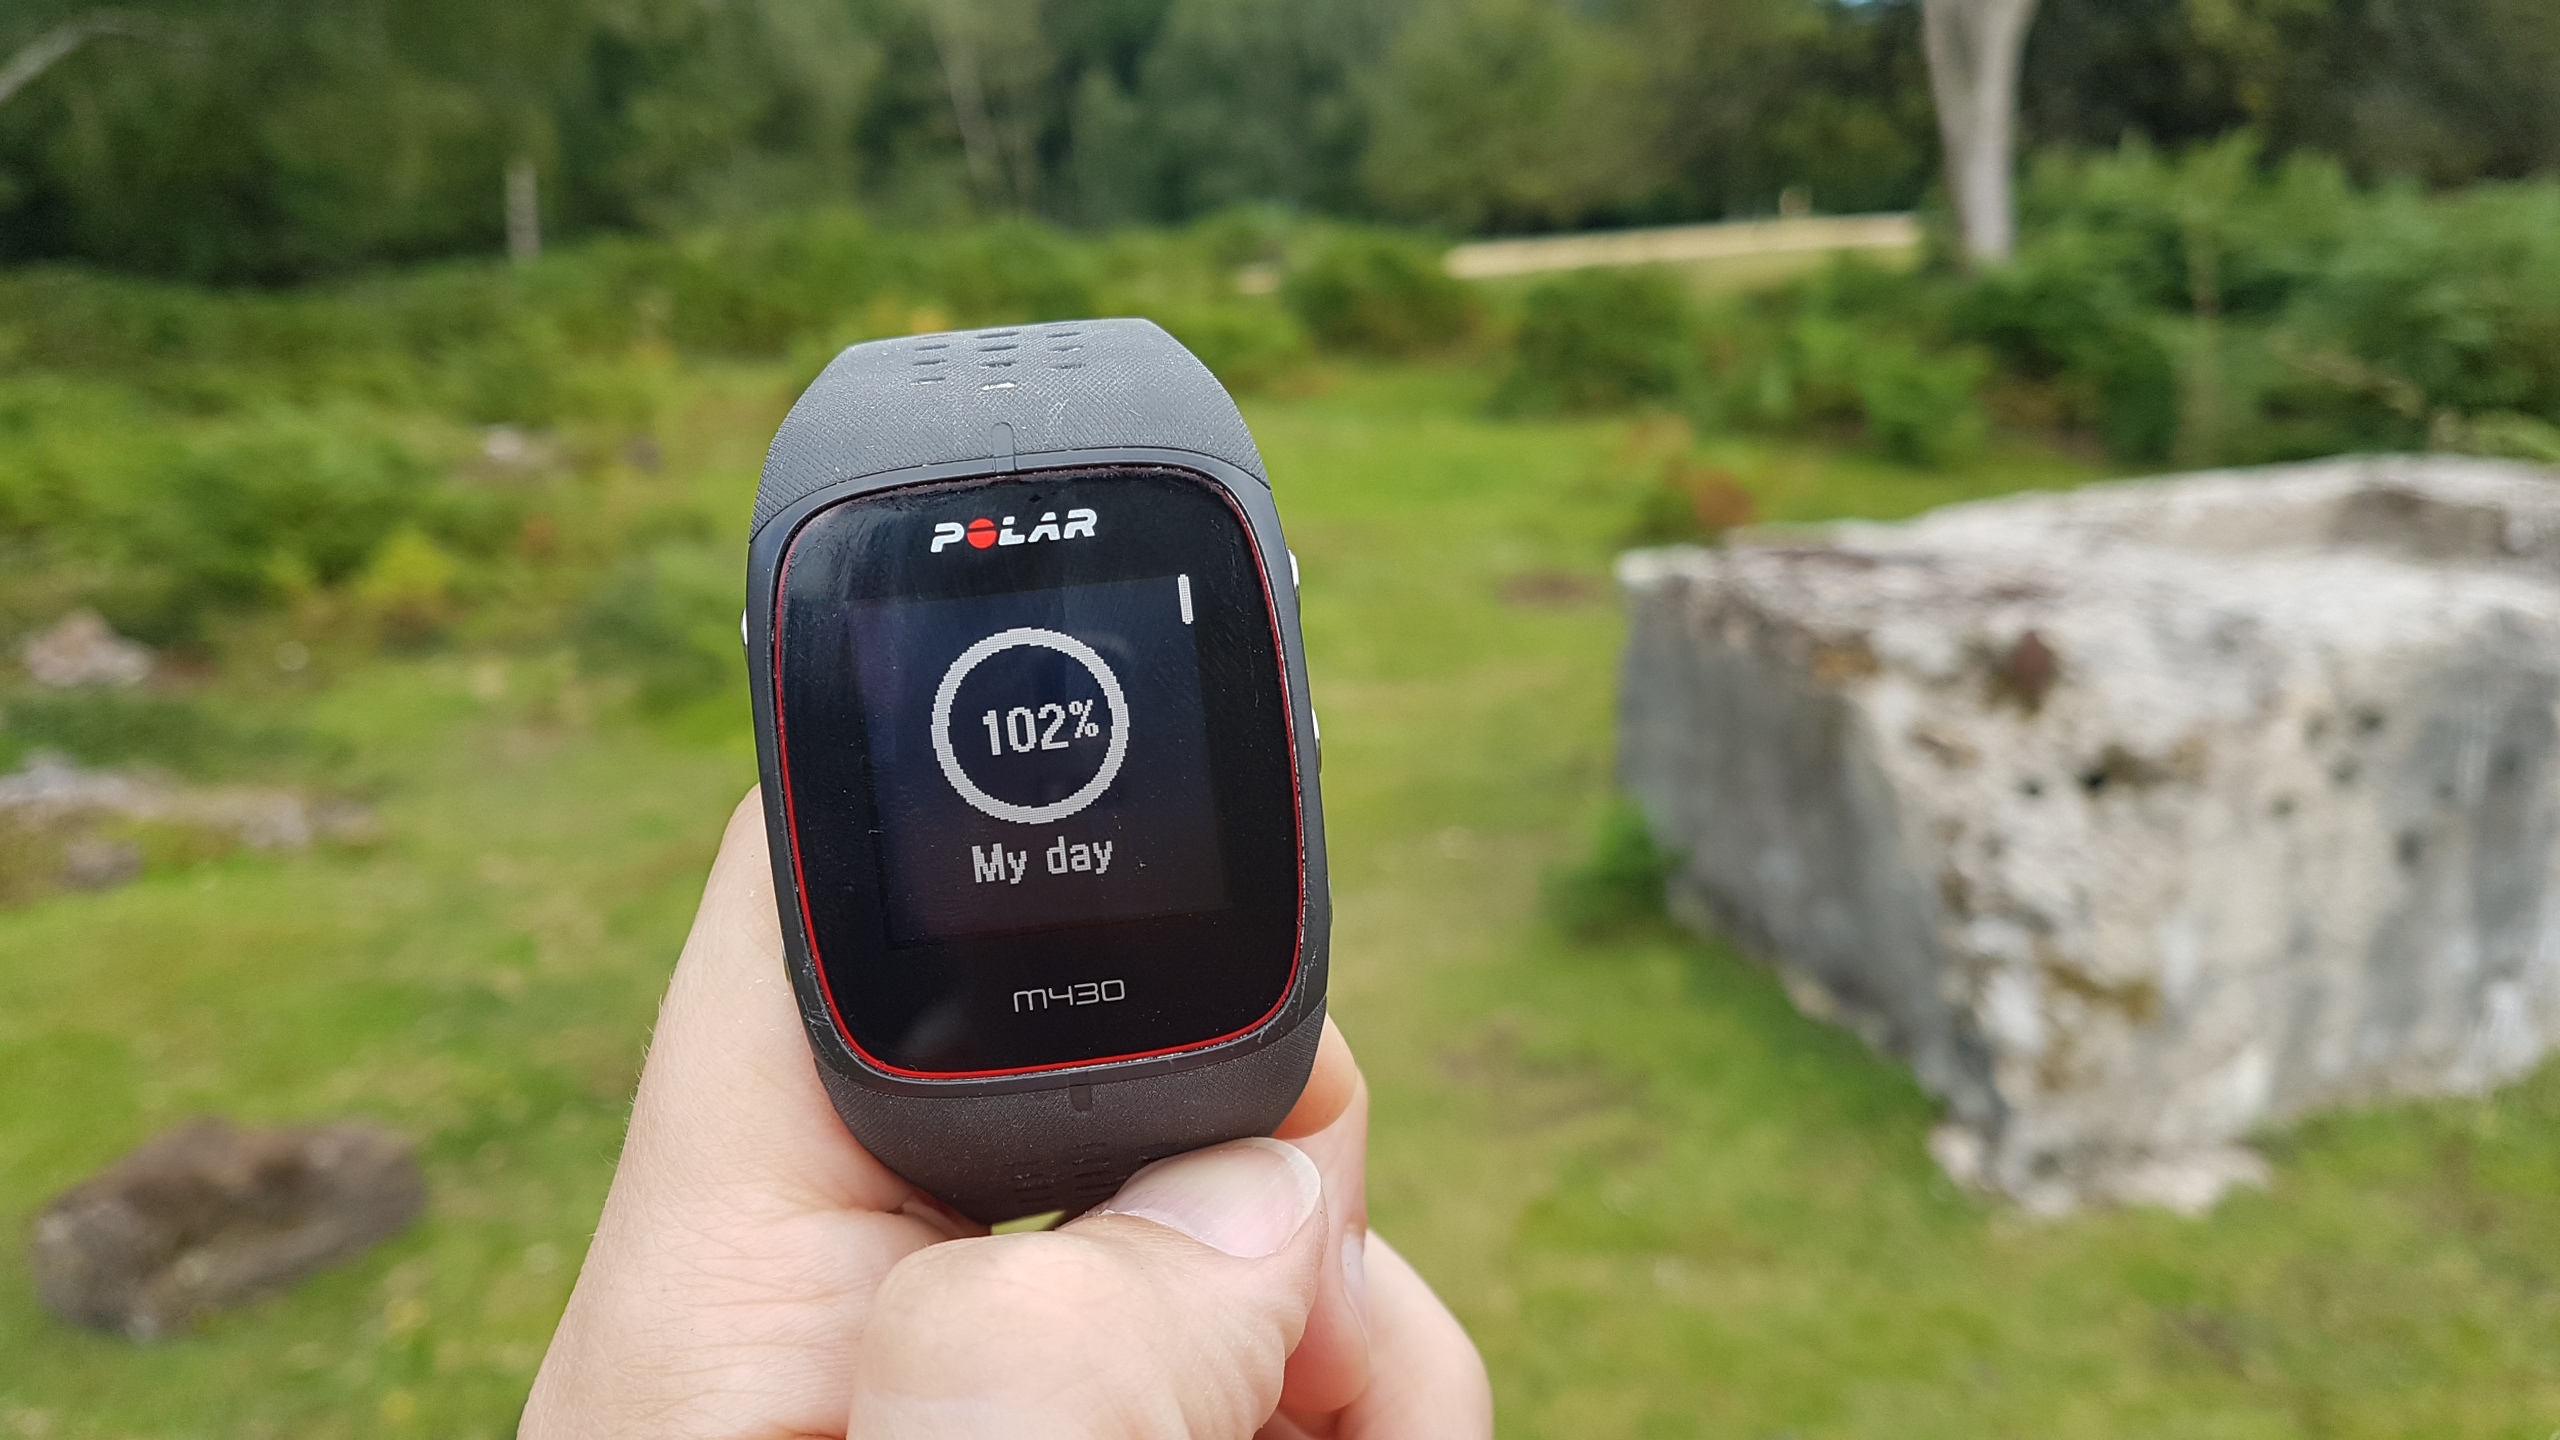 Polar M430 held in hand outdoors